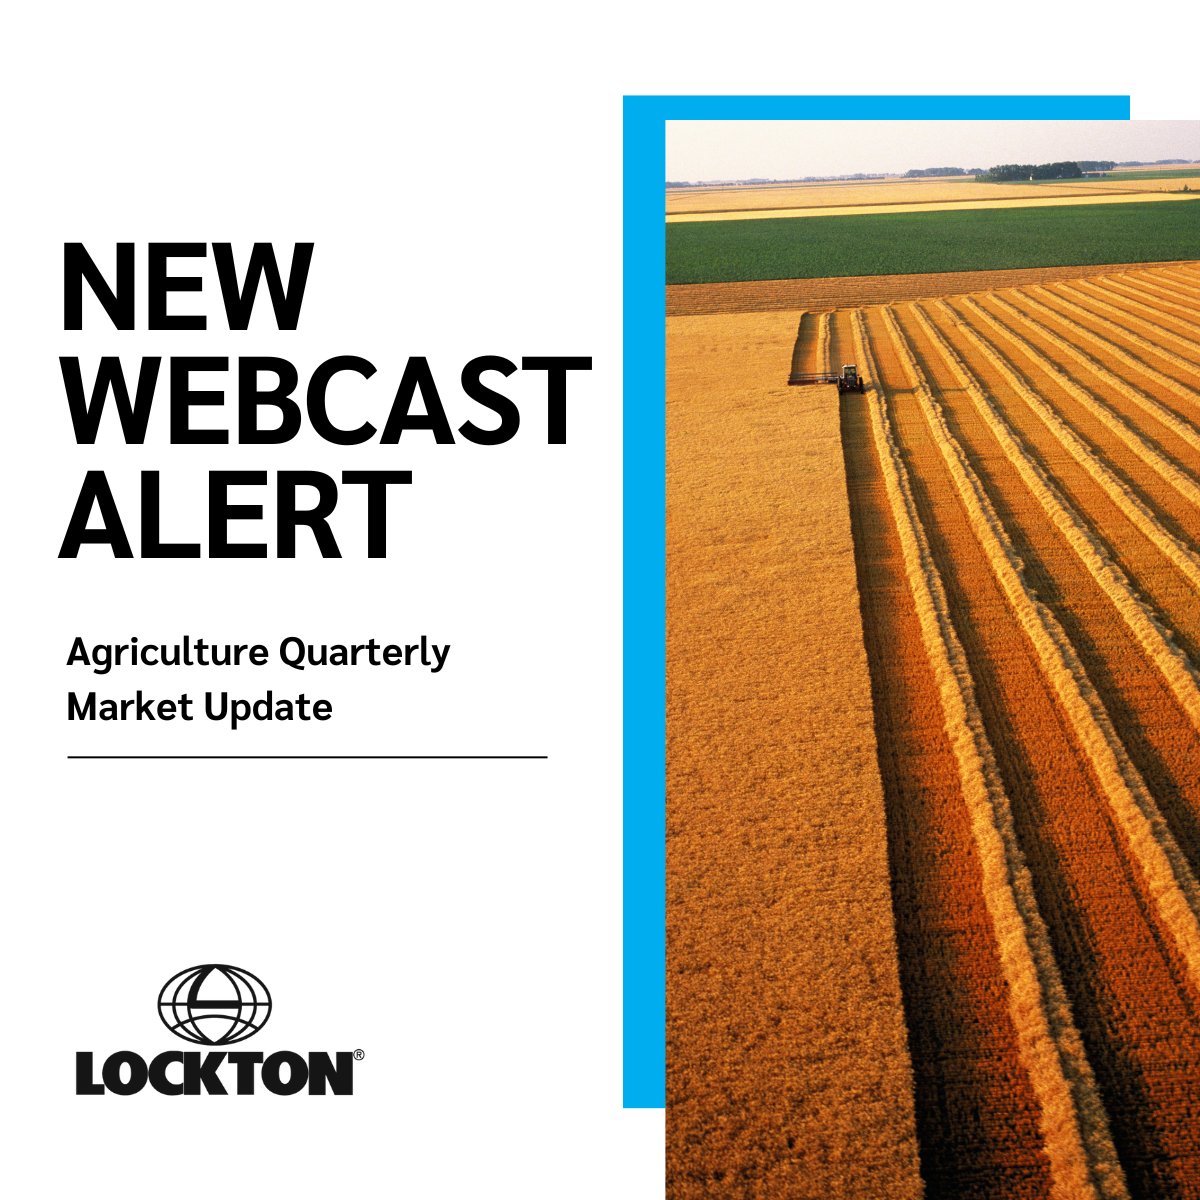 Join experts from Lockton and StoneX to learn about the latest trends and risks in the agriculture market. We’ll also feature a macroeconomic update and market reports on both Ags and Proteins. …culturequarterlymarket.splashthat.com/?gz=none